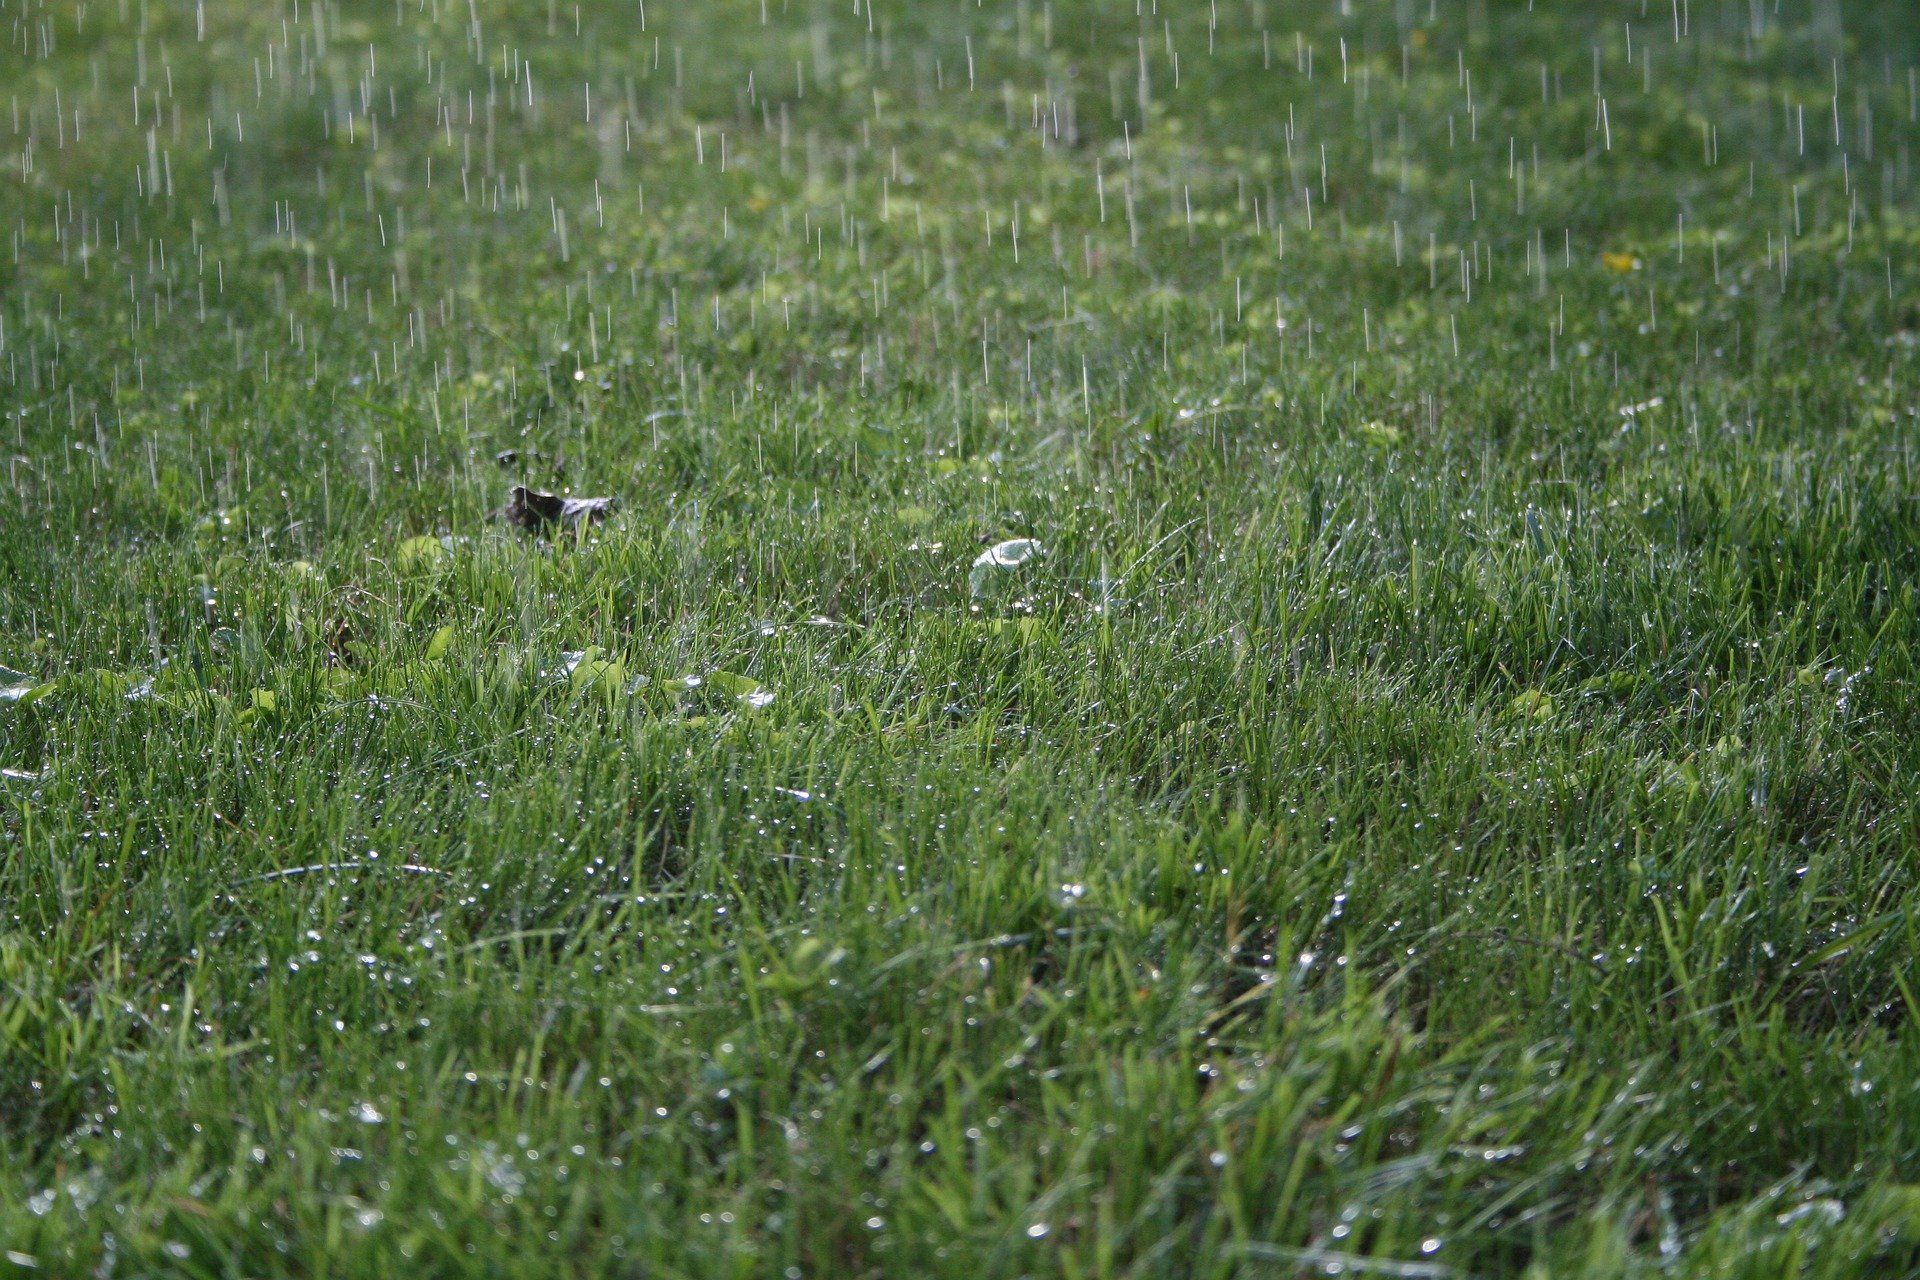 Photograph of a lawn on a rainy day